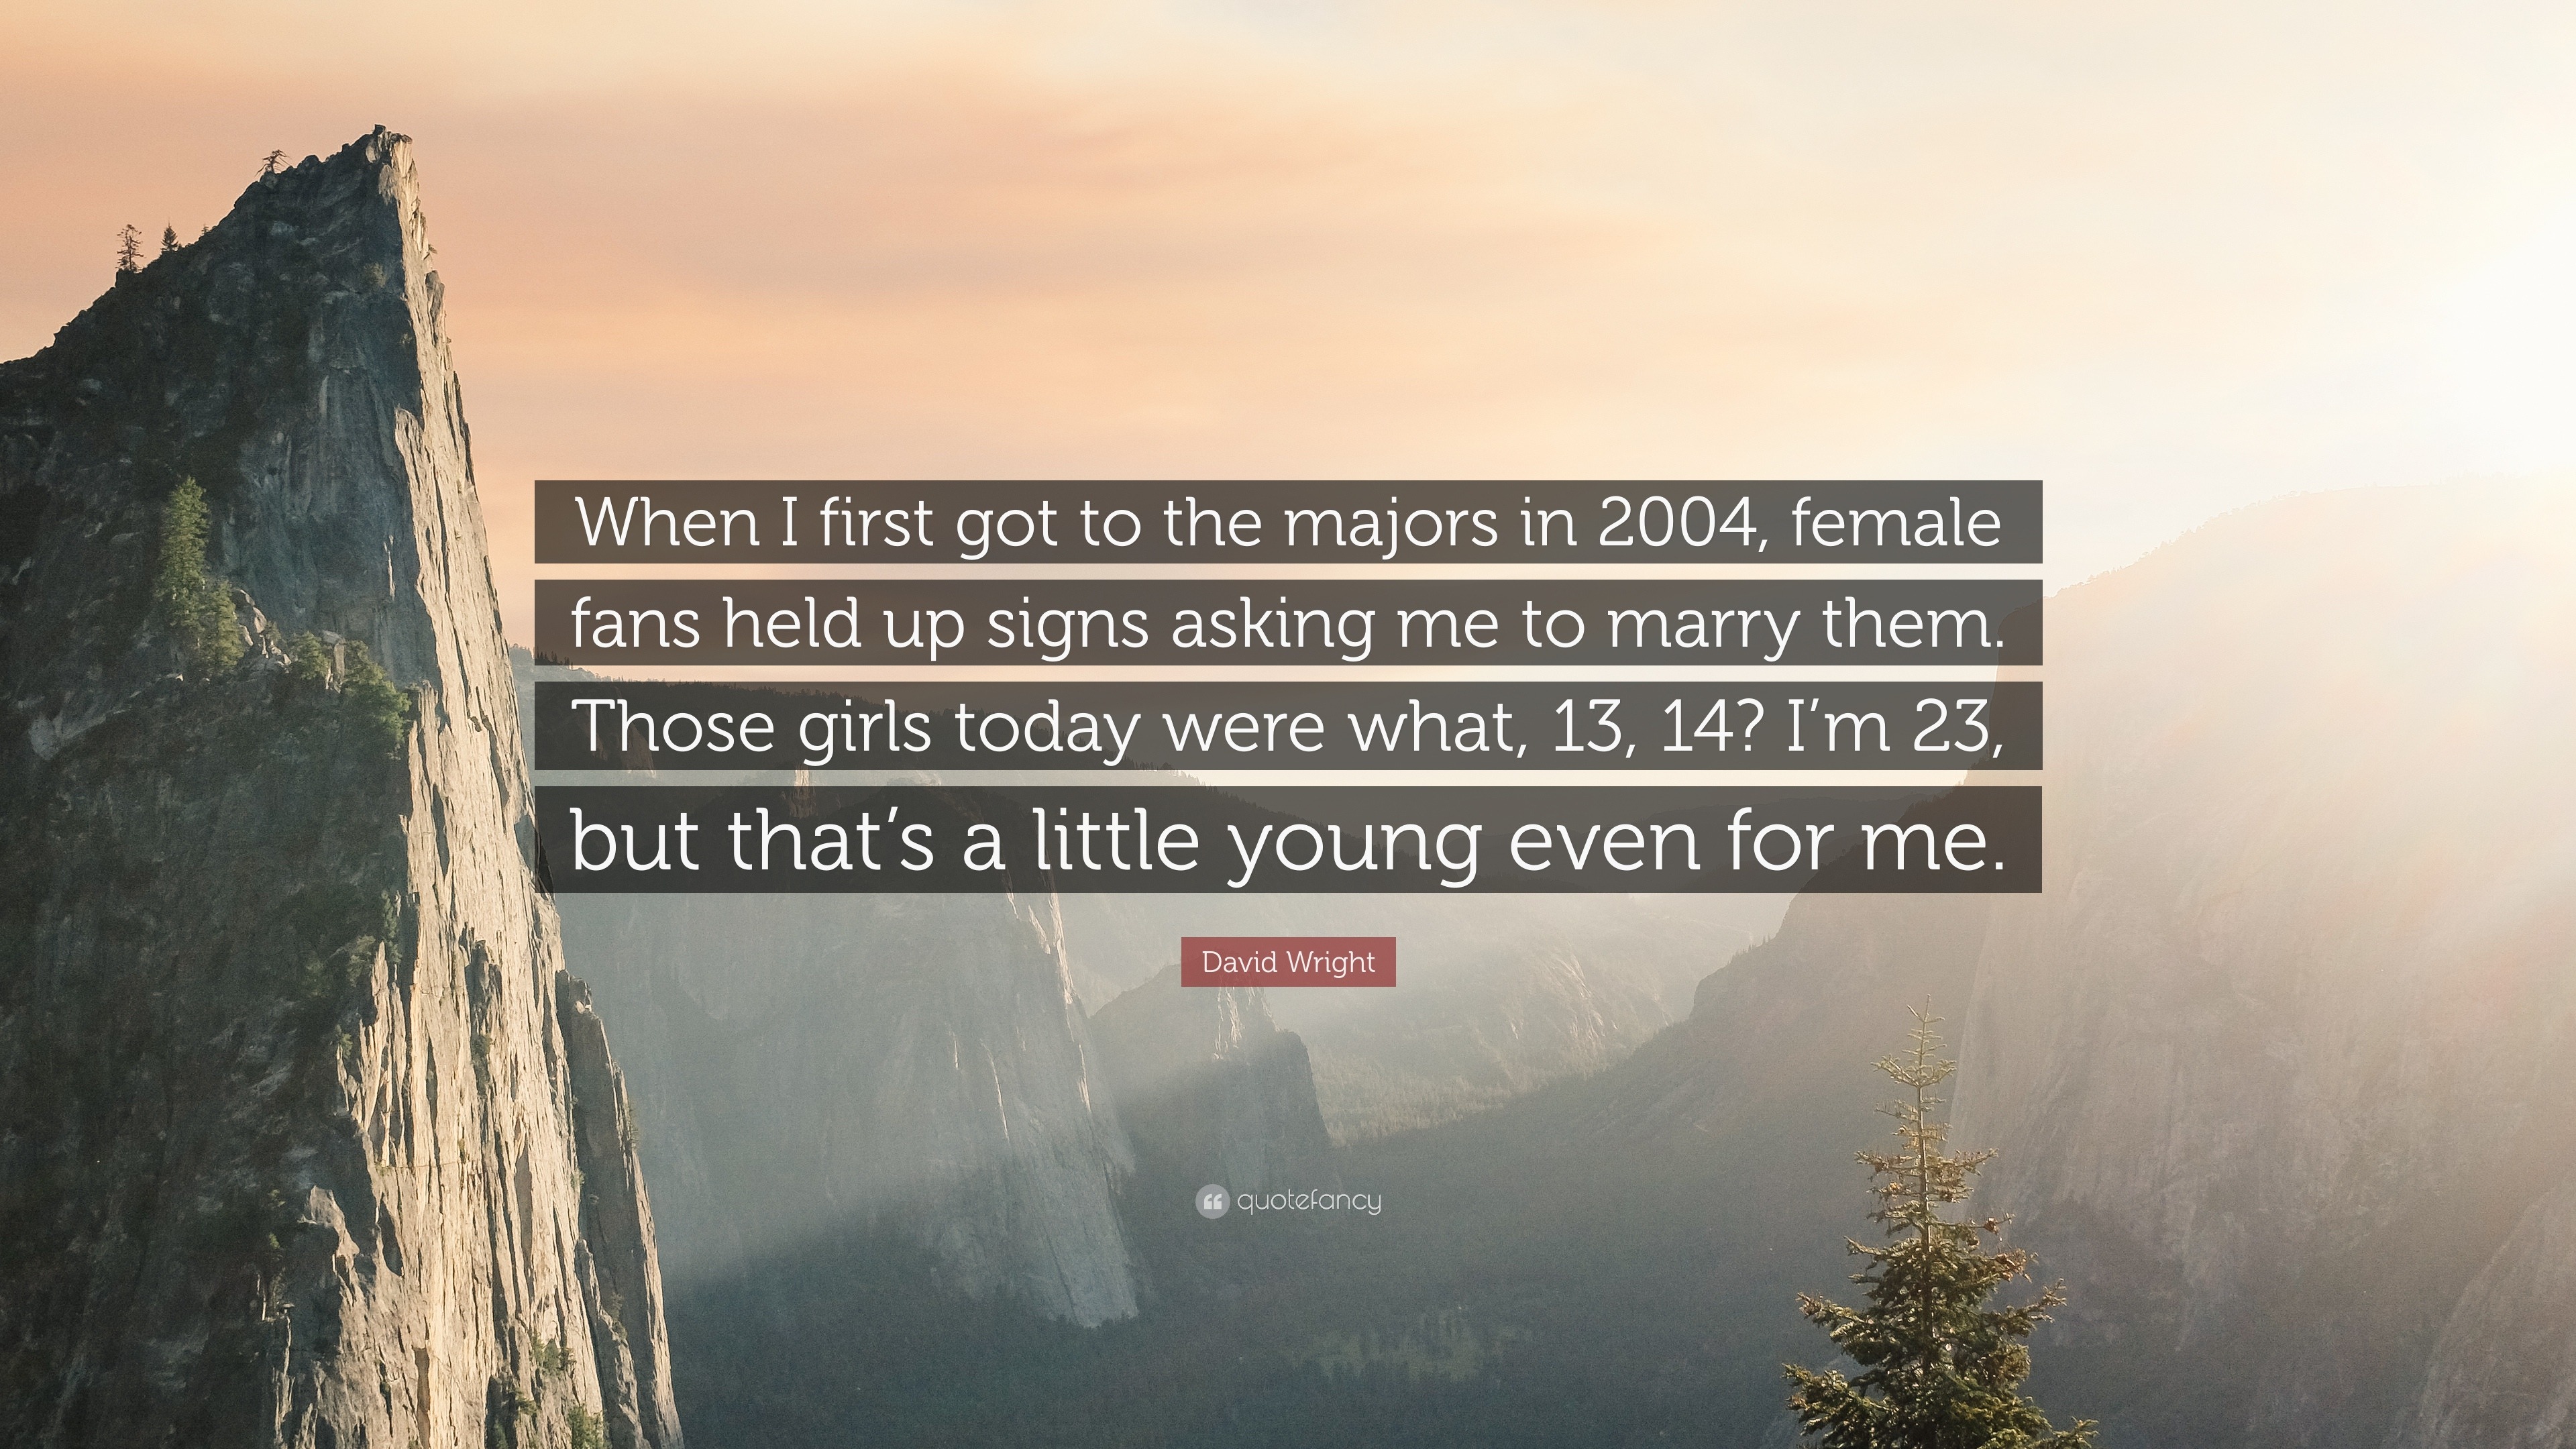 David Wright quote: When I first got to the majors in 2004, female